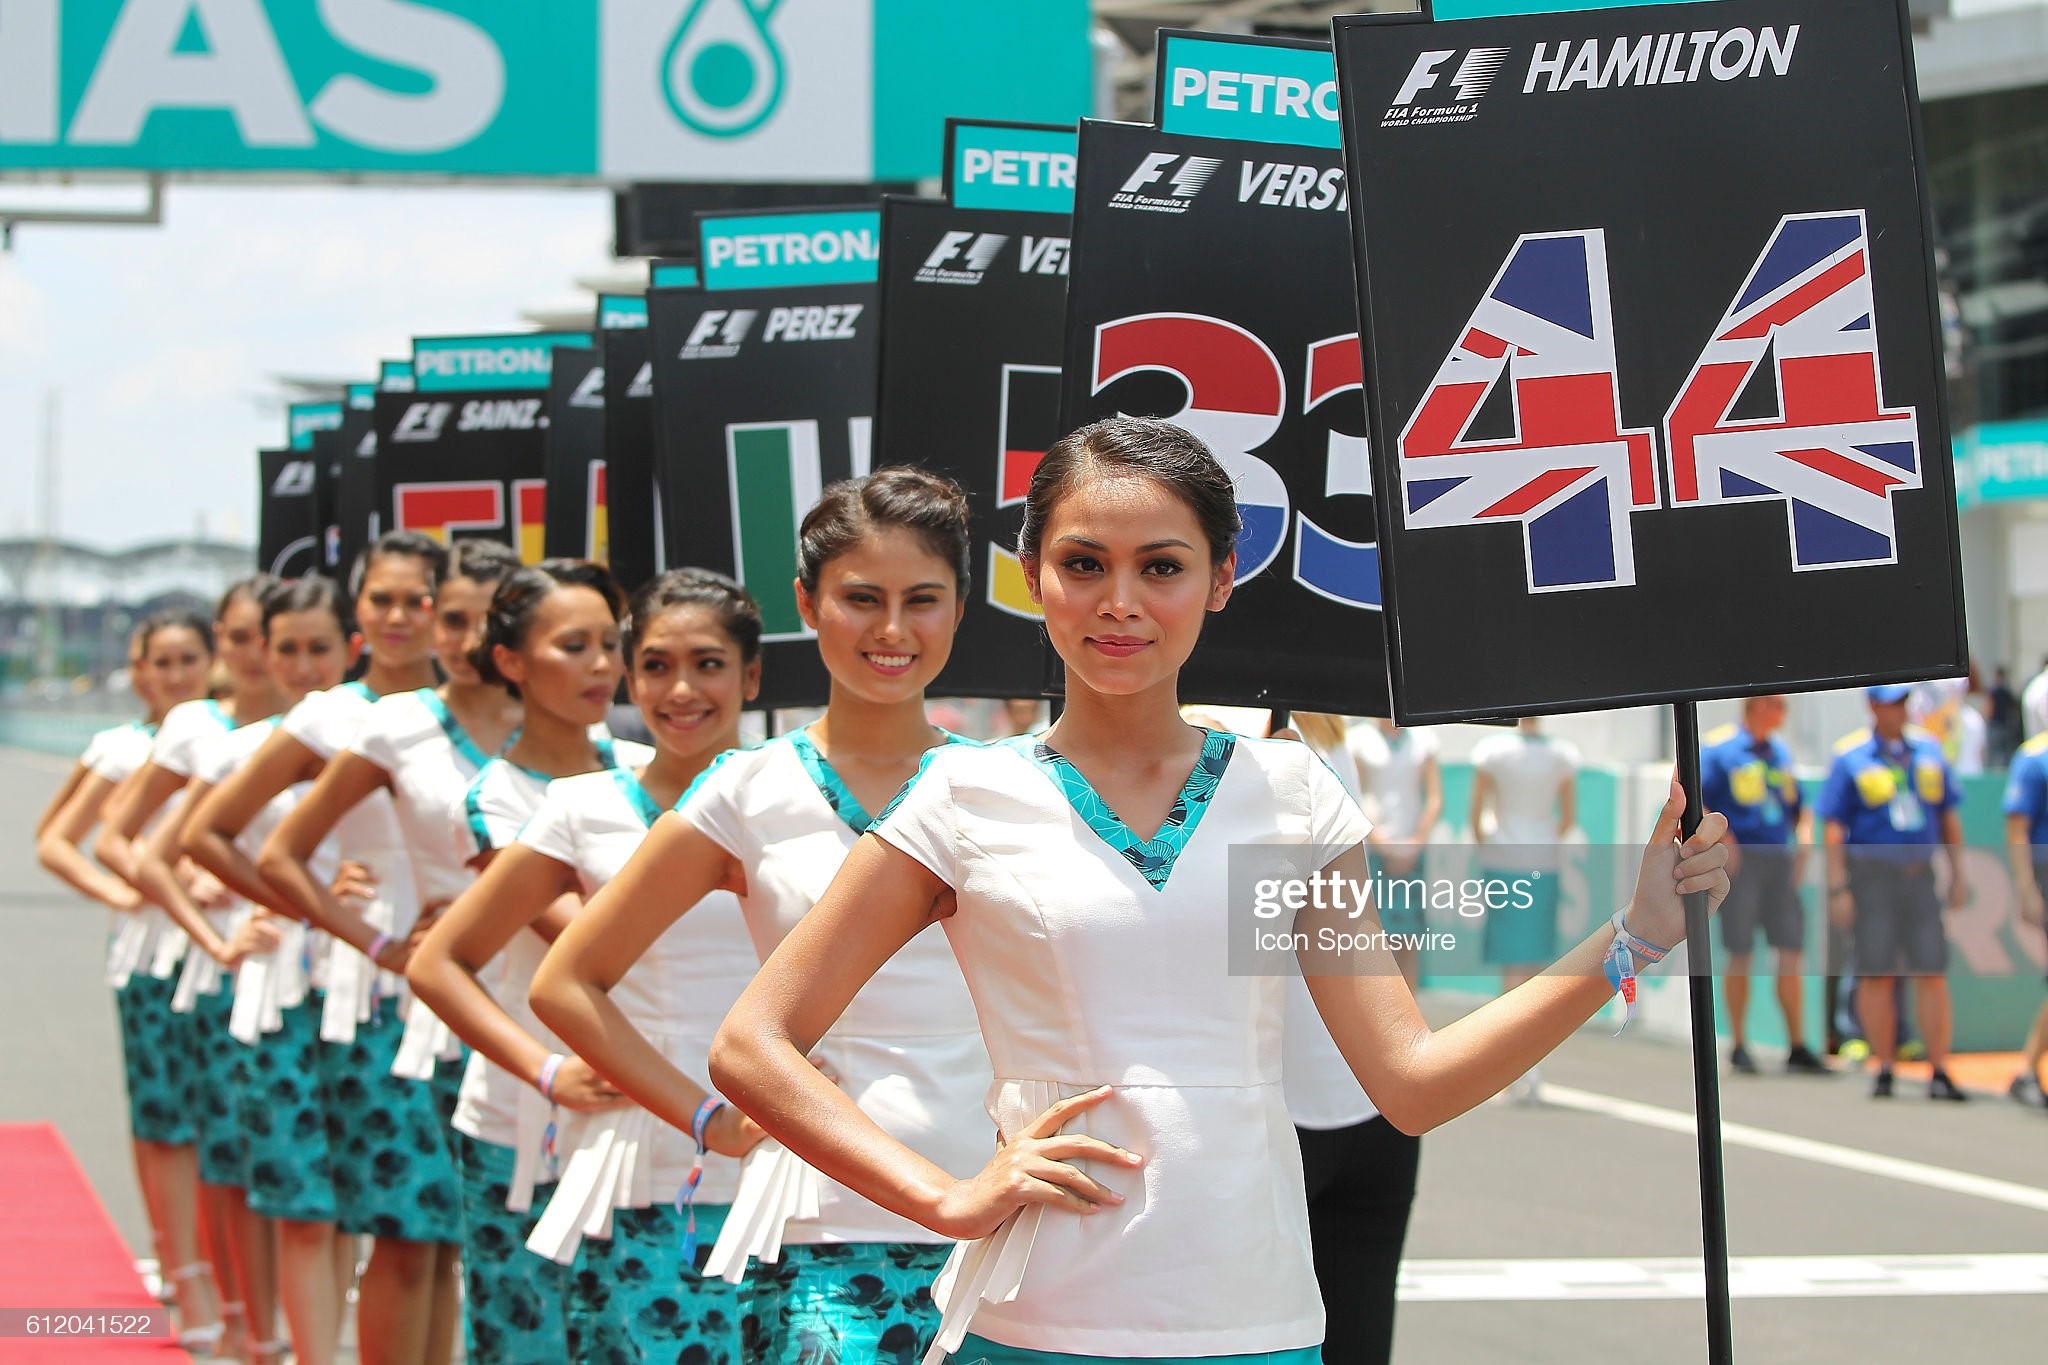 02 October 2016: grid girls pose for photograph at the grid before the start of the Formula 1 Malaysia Grand Prix held at Sepang International Circuit in Sepang, Malaysia. 